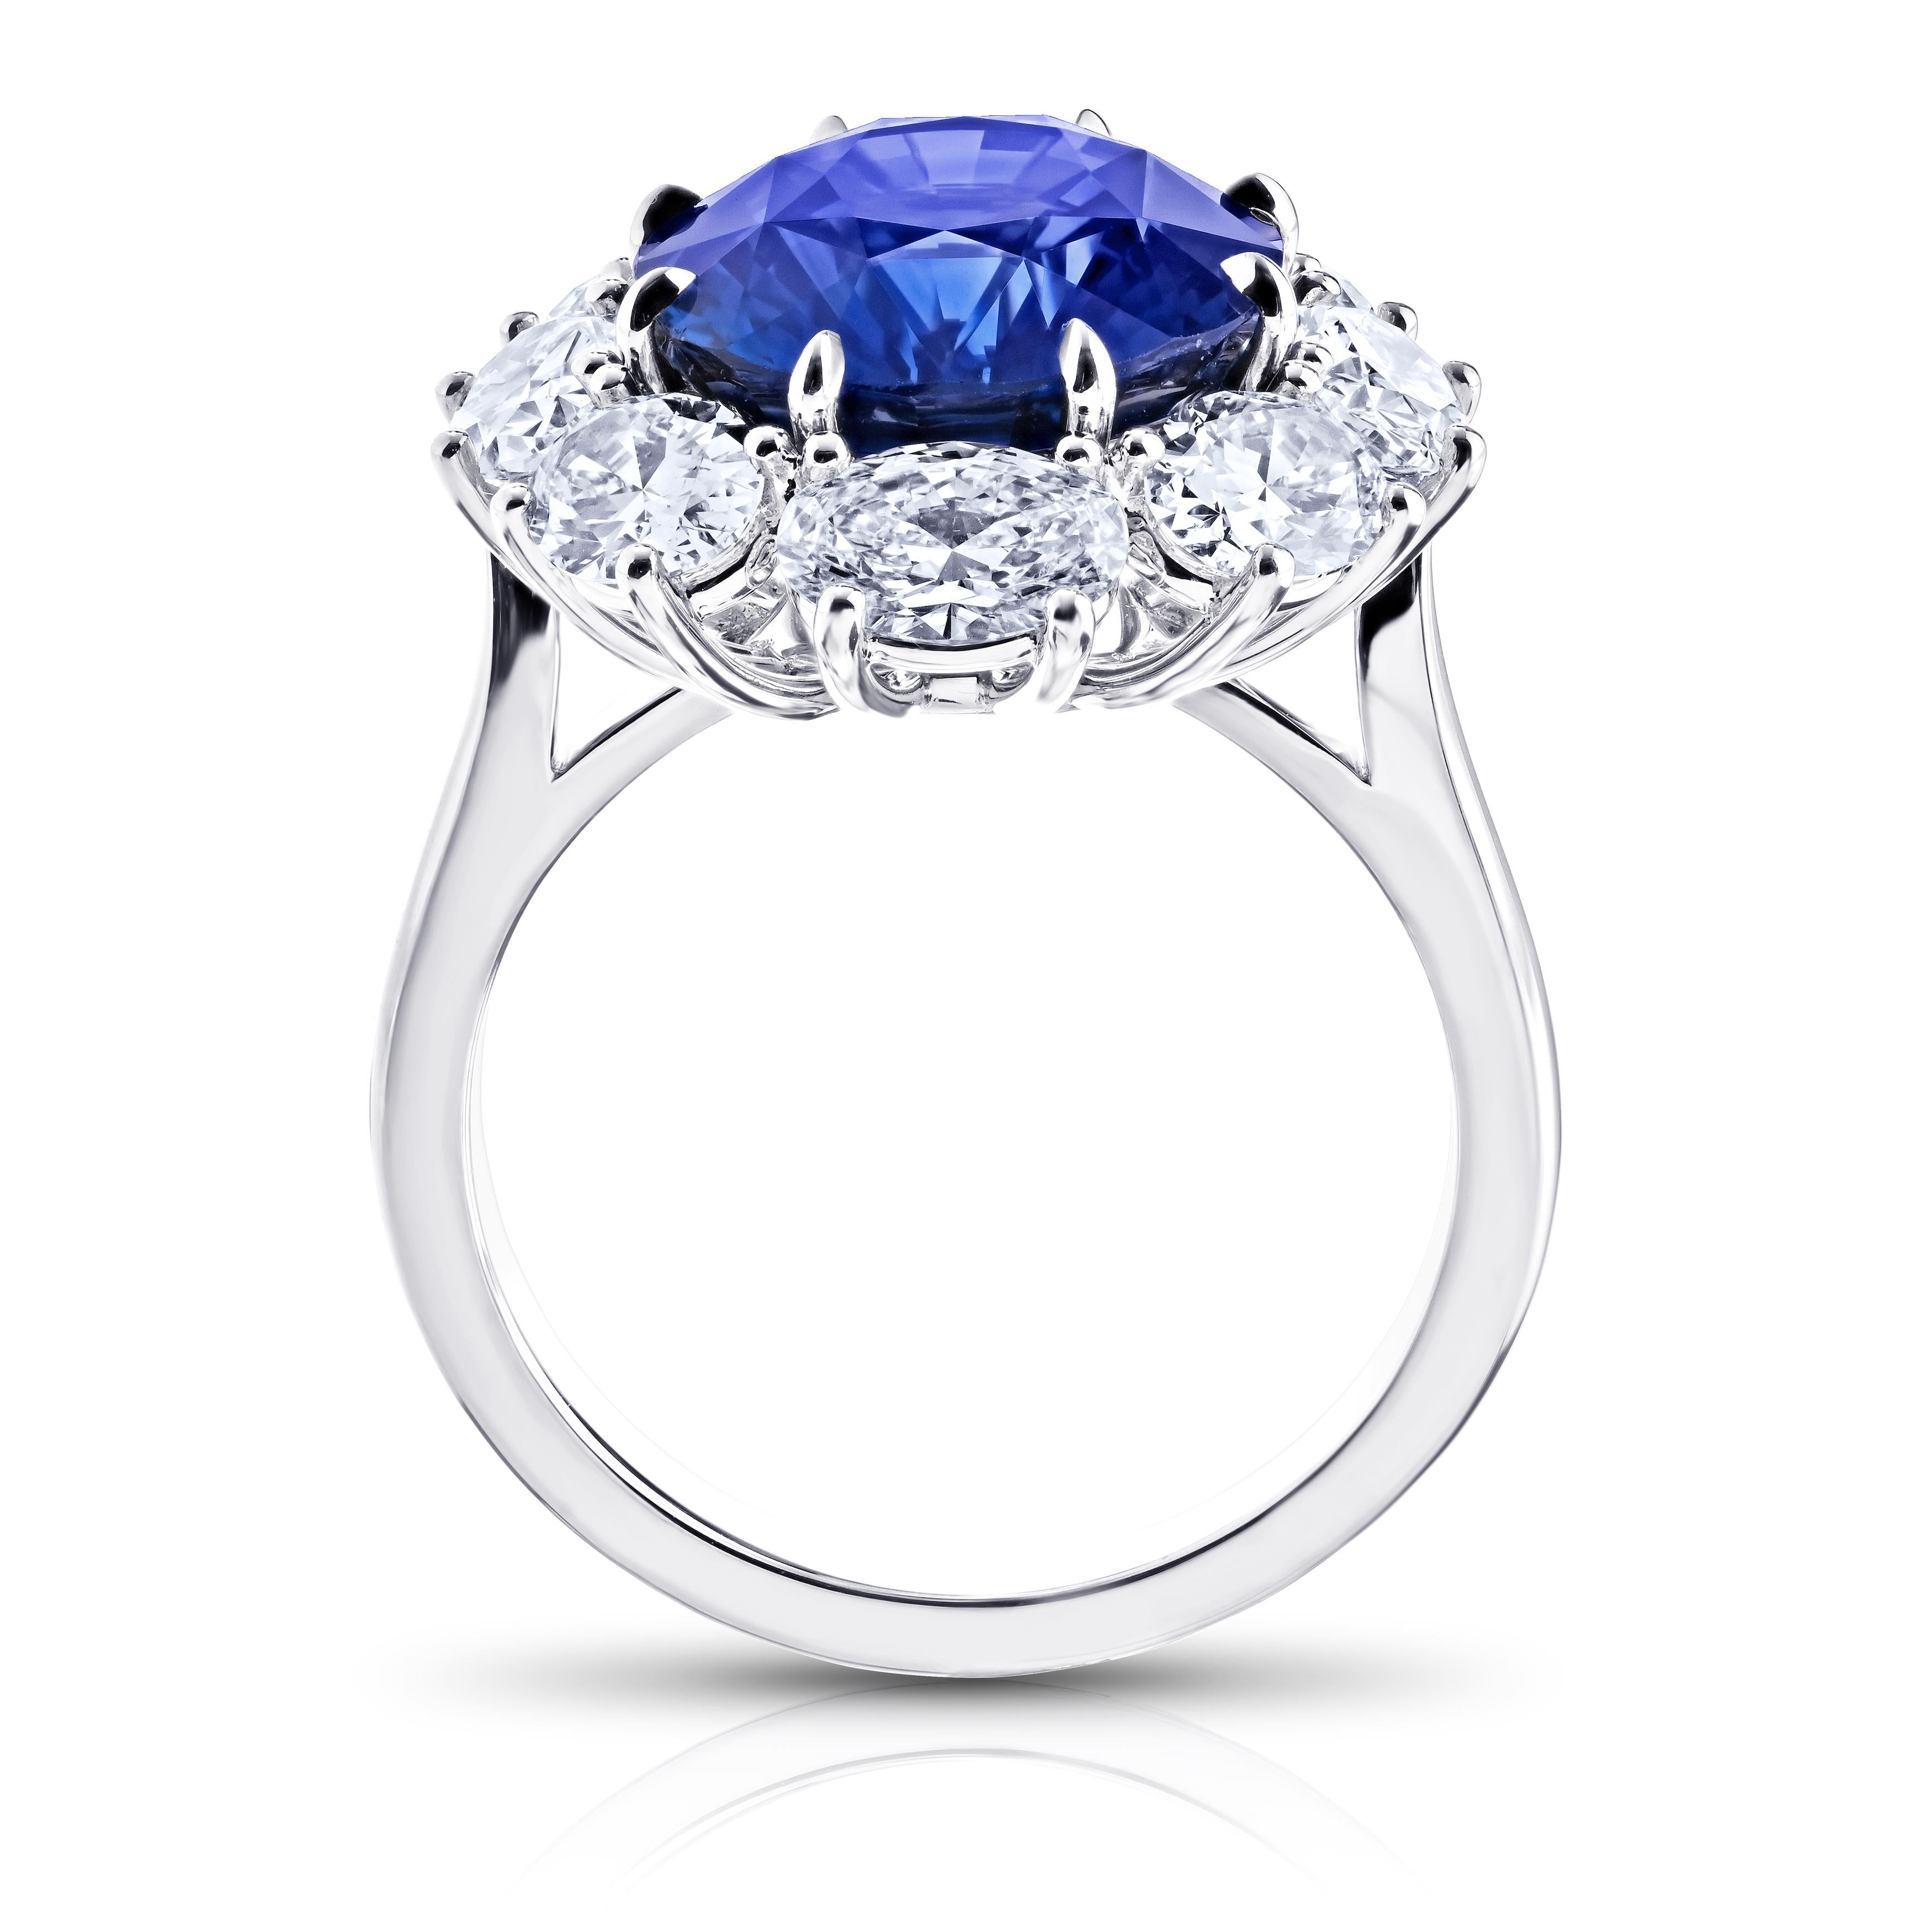 Contemporary 8.37 Carat Oval Blue Sapphire and Platinum Diamond Ring For Sale